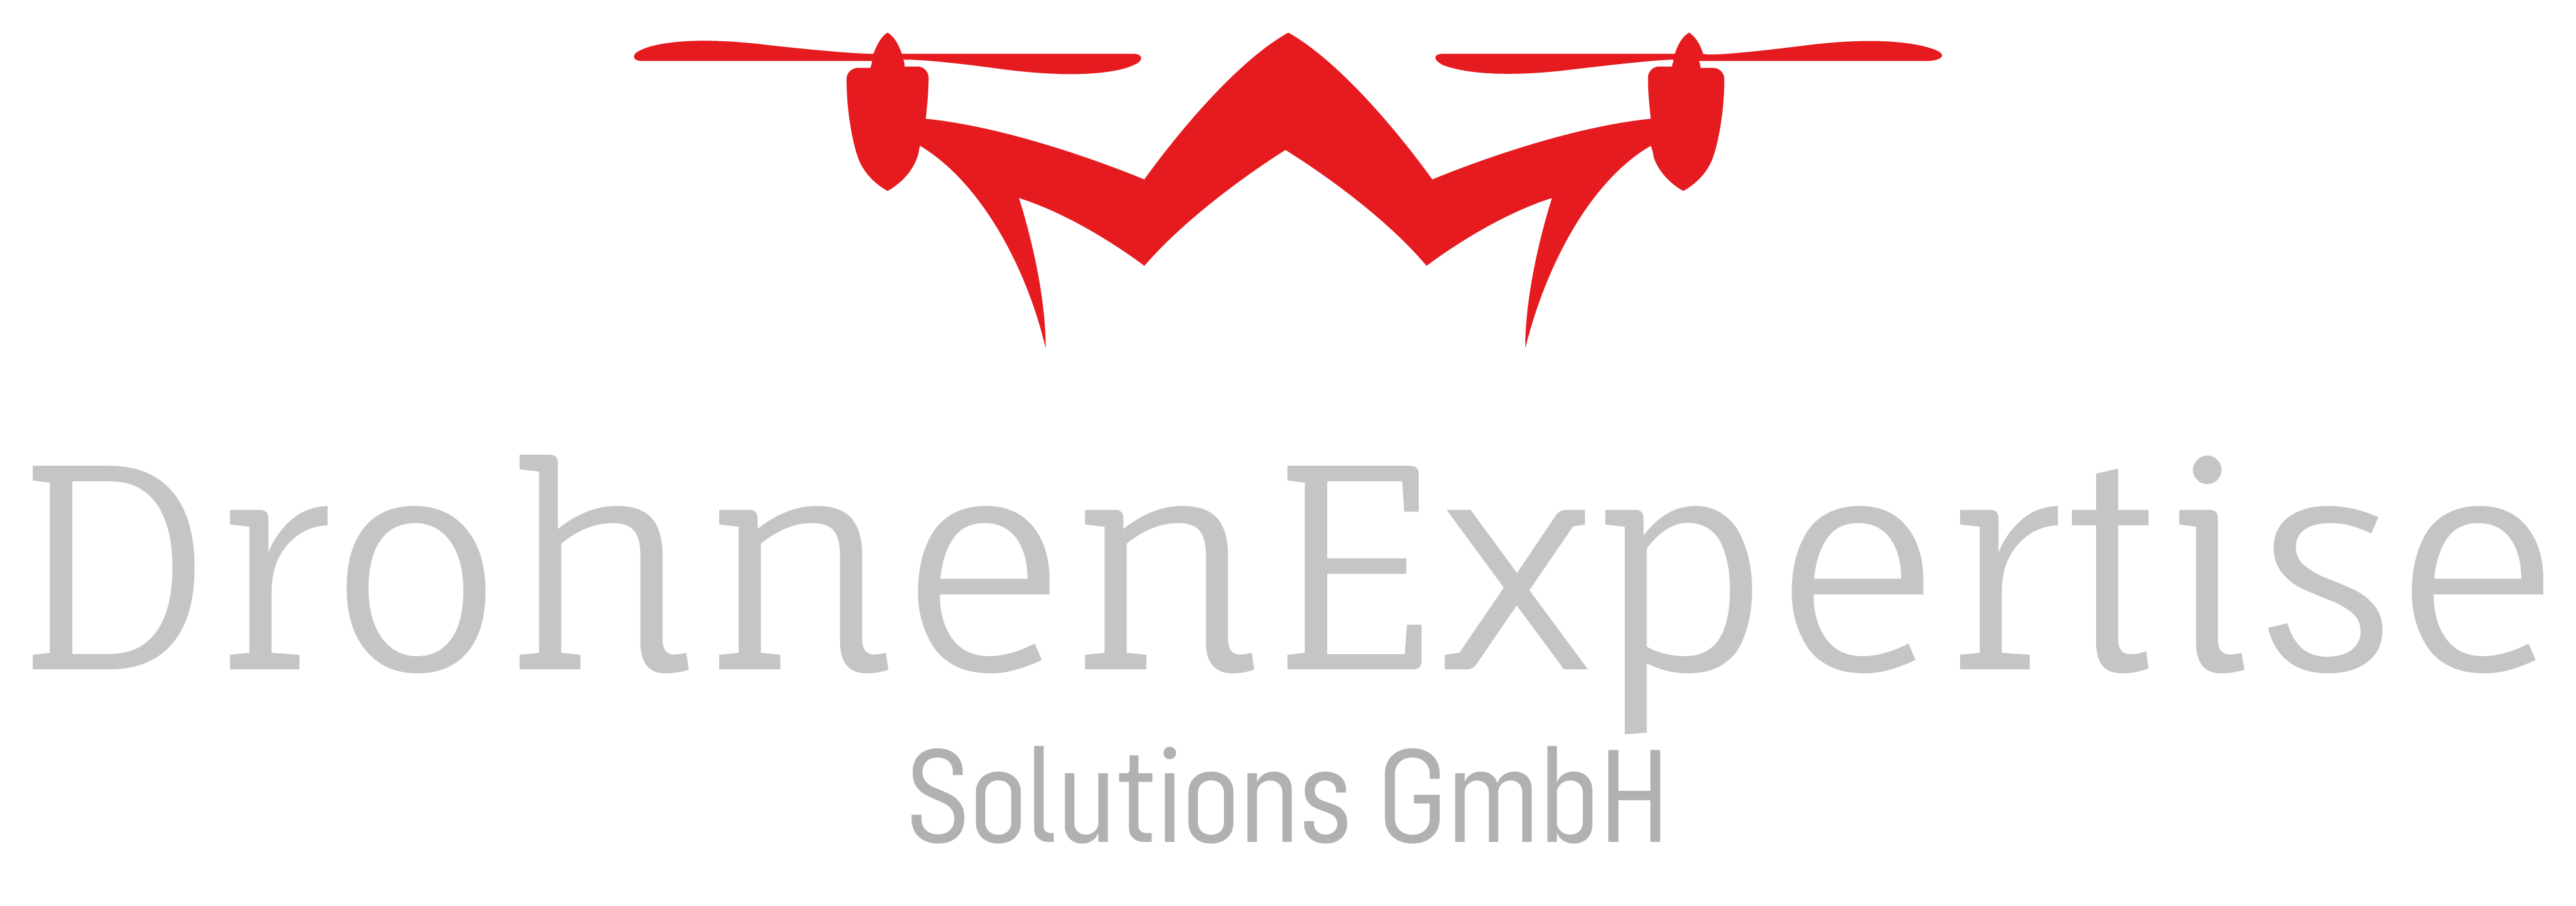 Drohnen Expertise Solutions GmbH